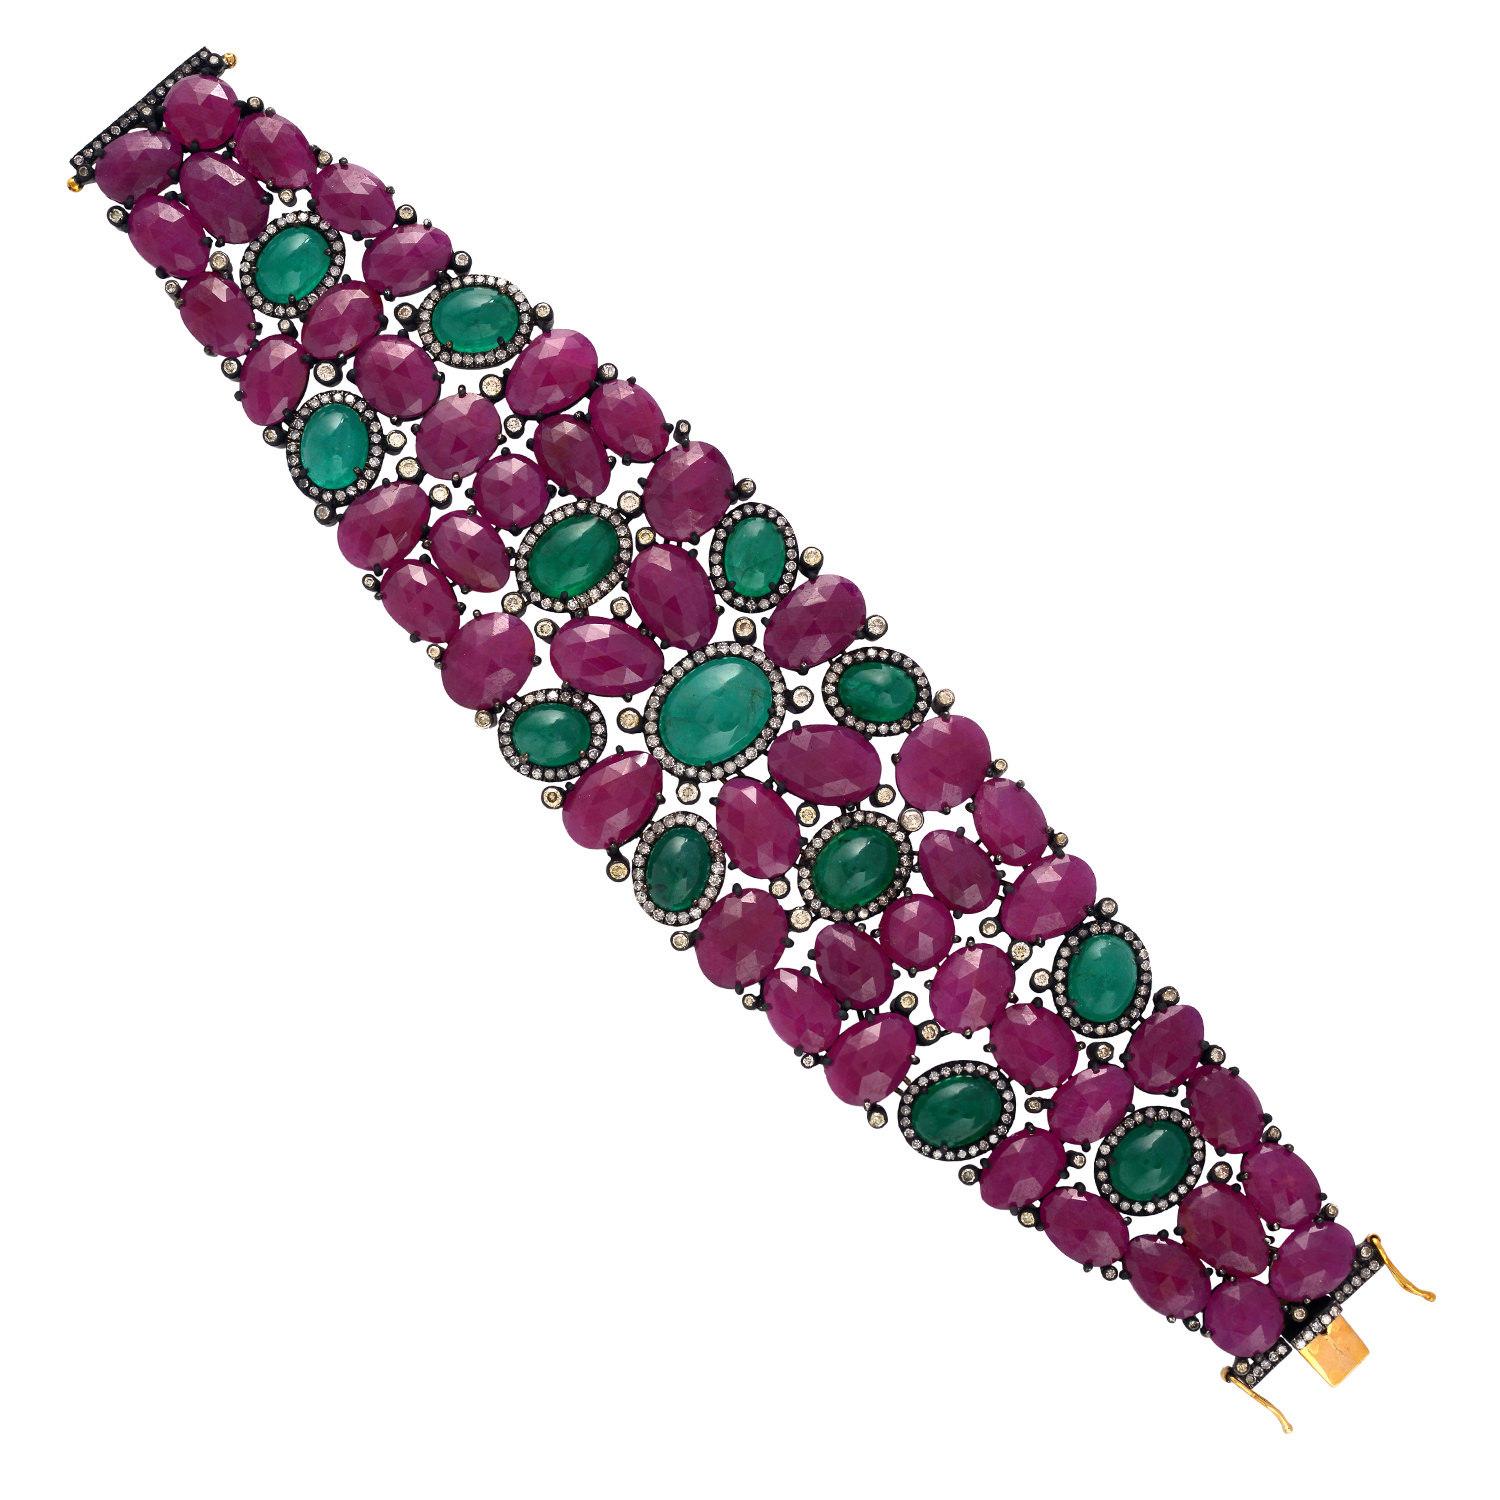 Contemporary Baroque 139 Carats Natural Ruby Emerald & Diamond Bracelet 18k Gold & Silver For Sale